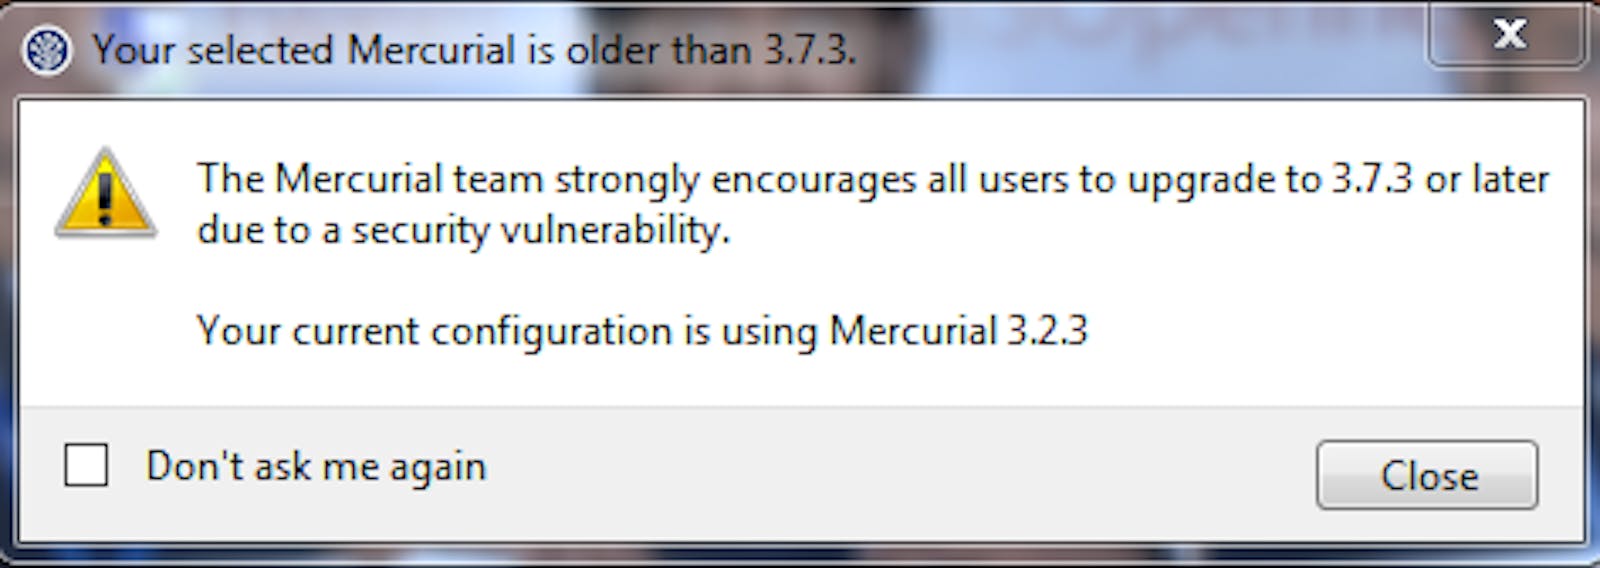 SourceTree Issue: The Mercurial team strongly encourages all users to upgrade to 3.7.3 due to security vulnerability